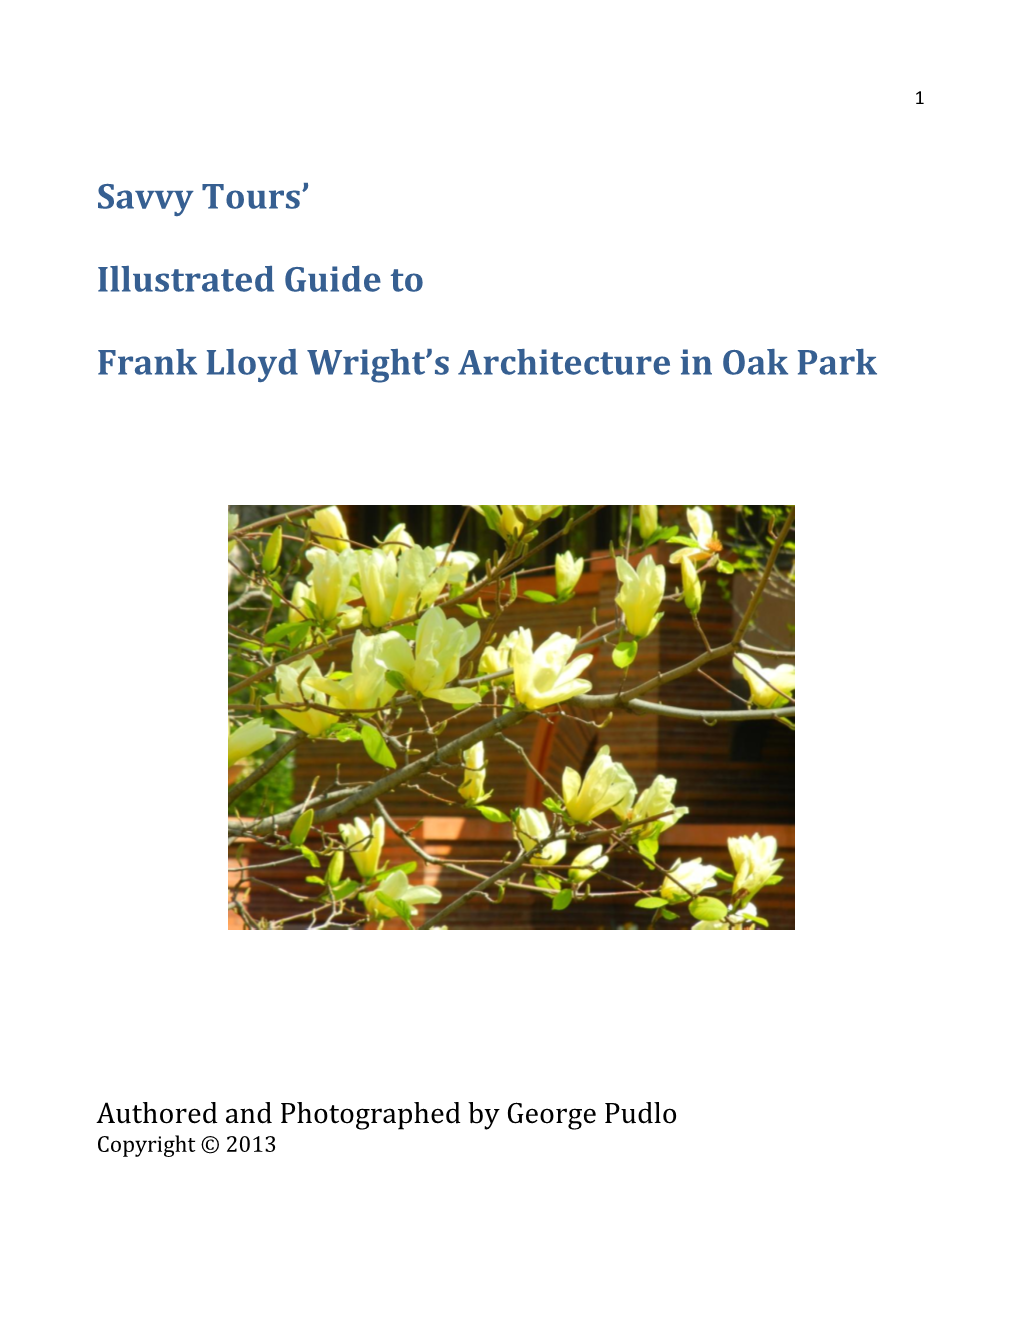 Savvy Tours' Illustrated Guide to Frank Lloyd Wright's Architecture in Oak